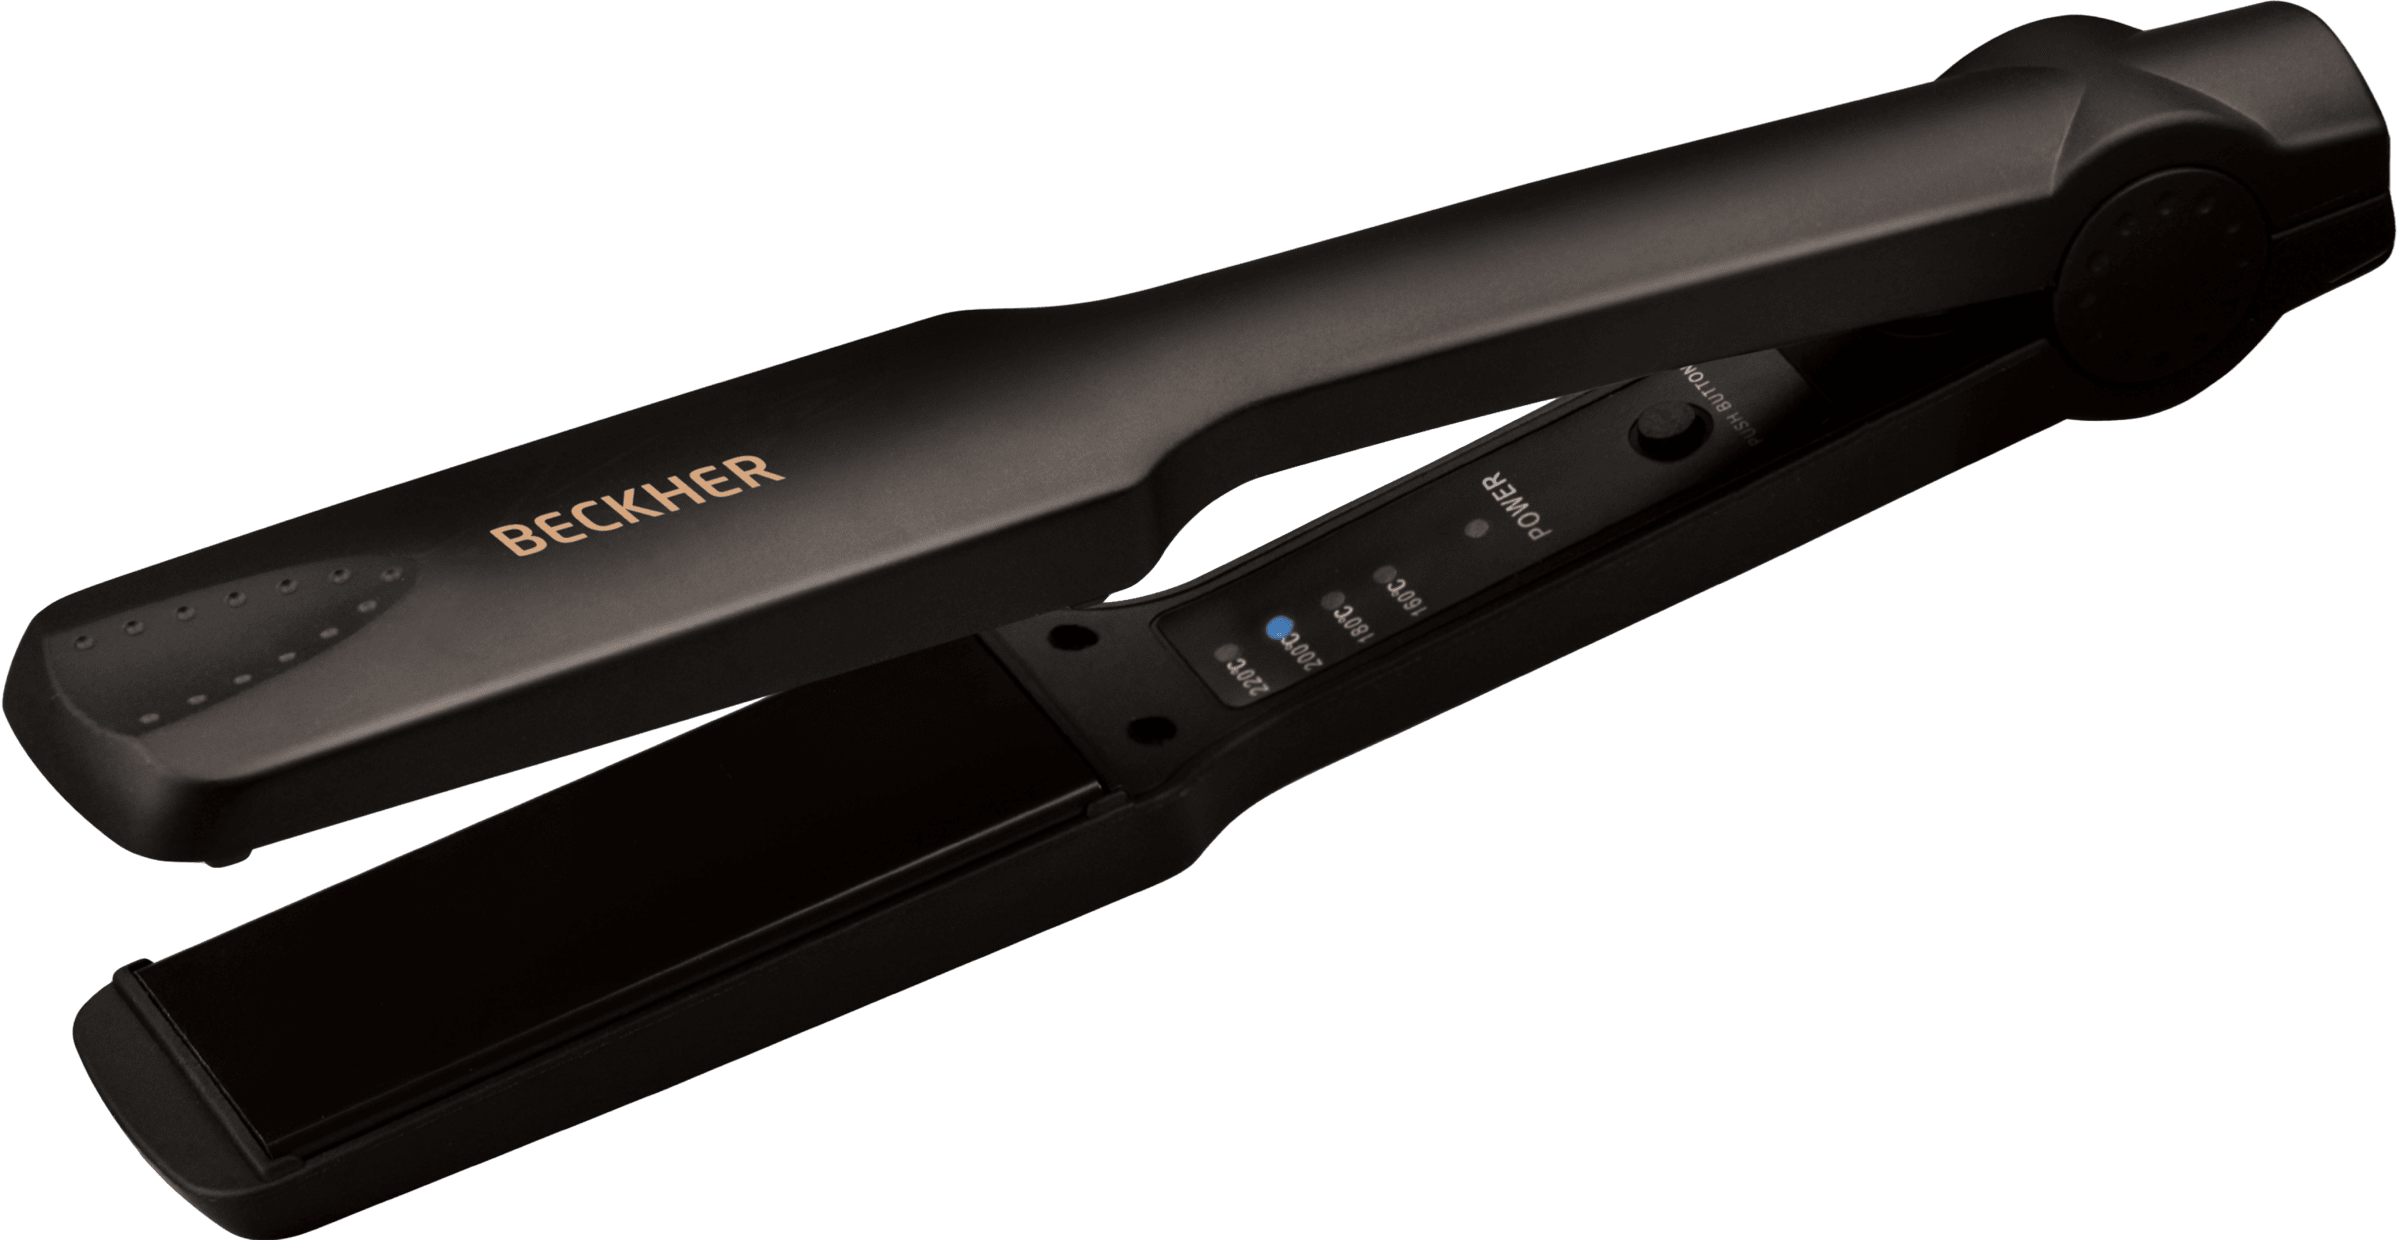 Hair Straightener by Beckher, product number MI-HS 1401B